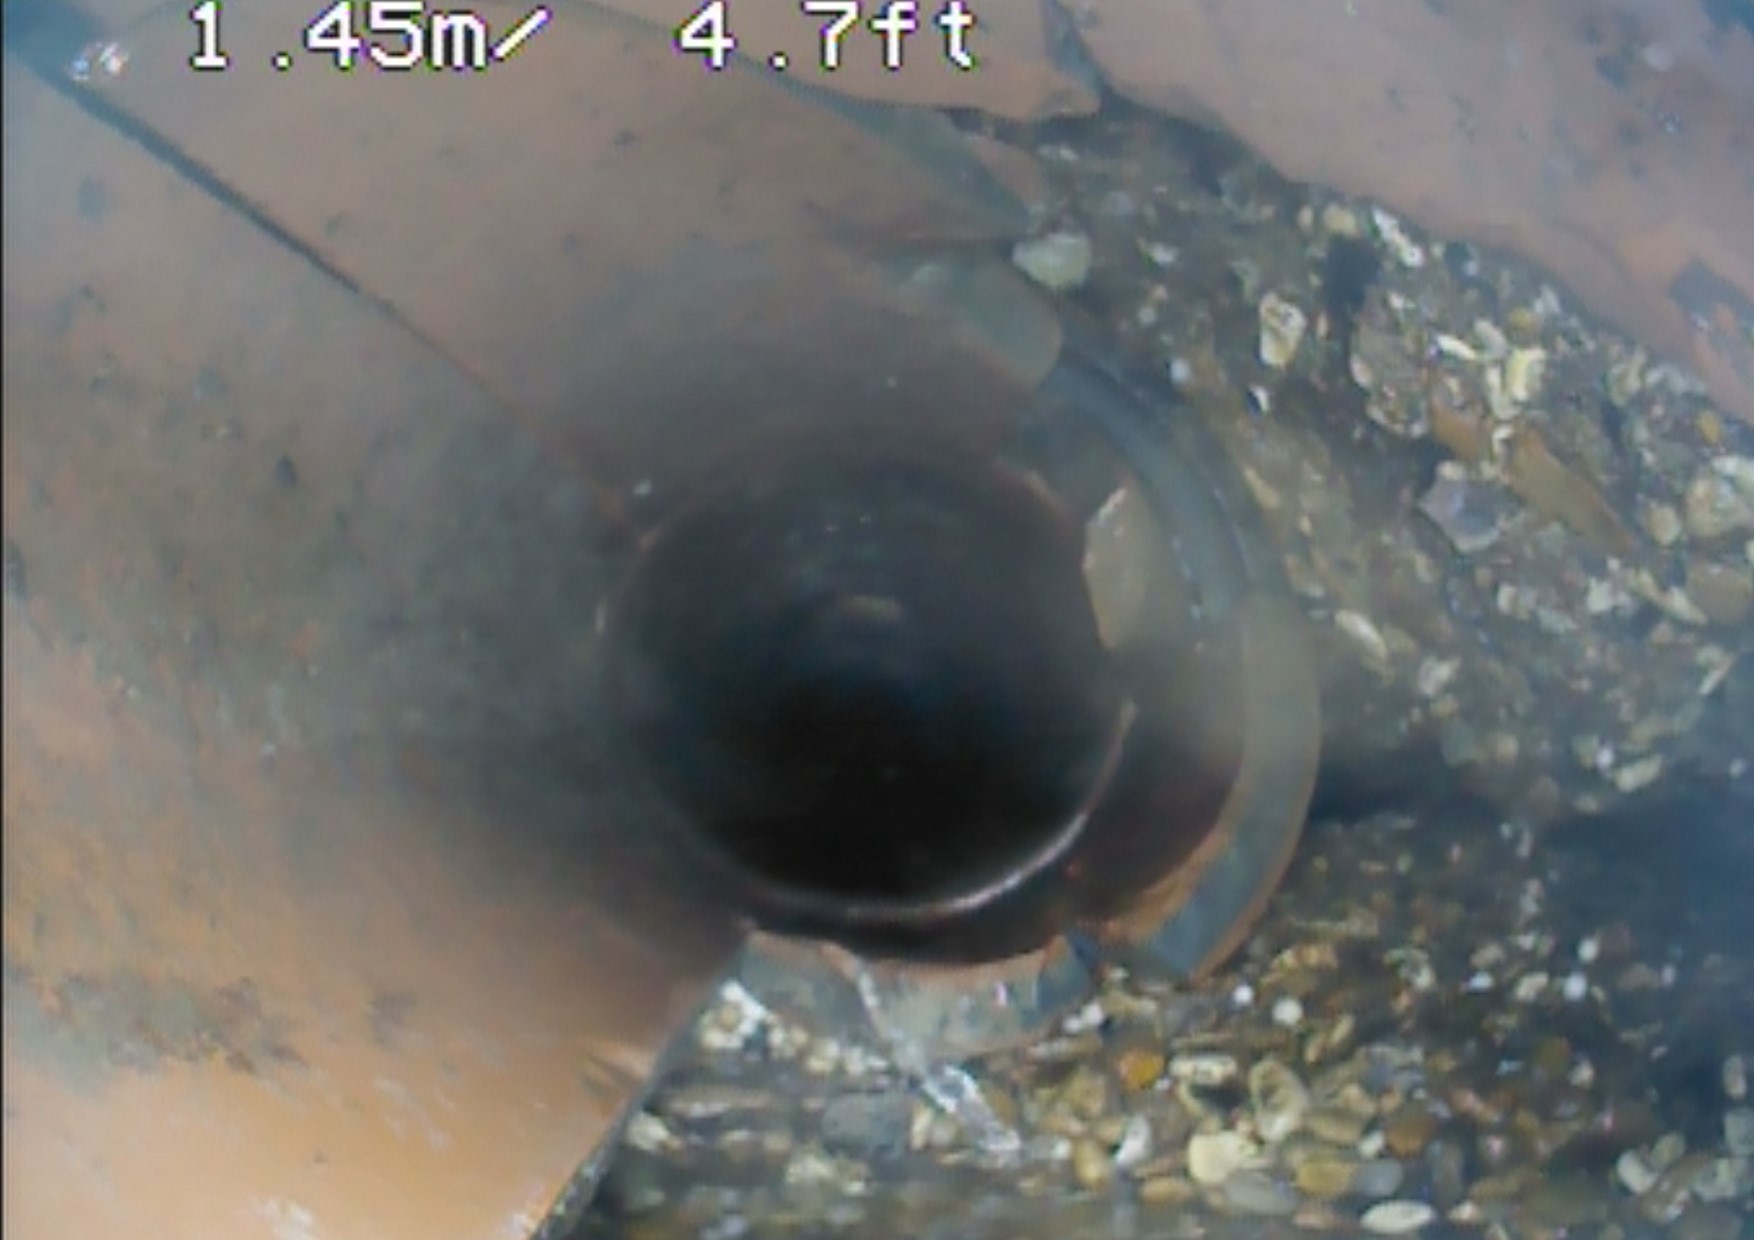 Collapsed pipe